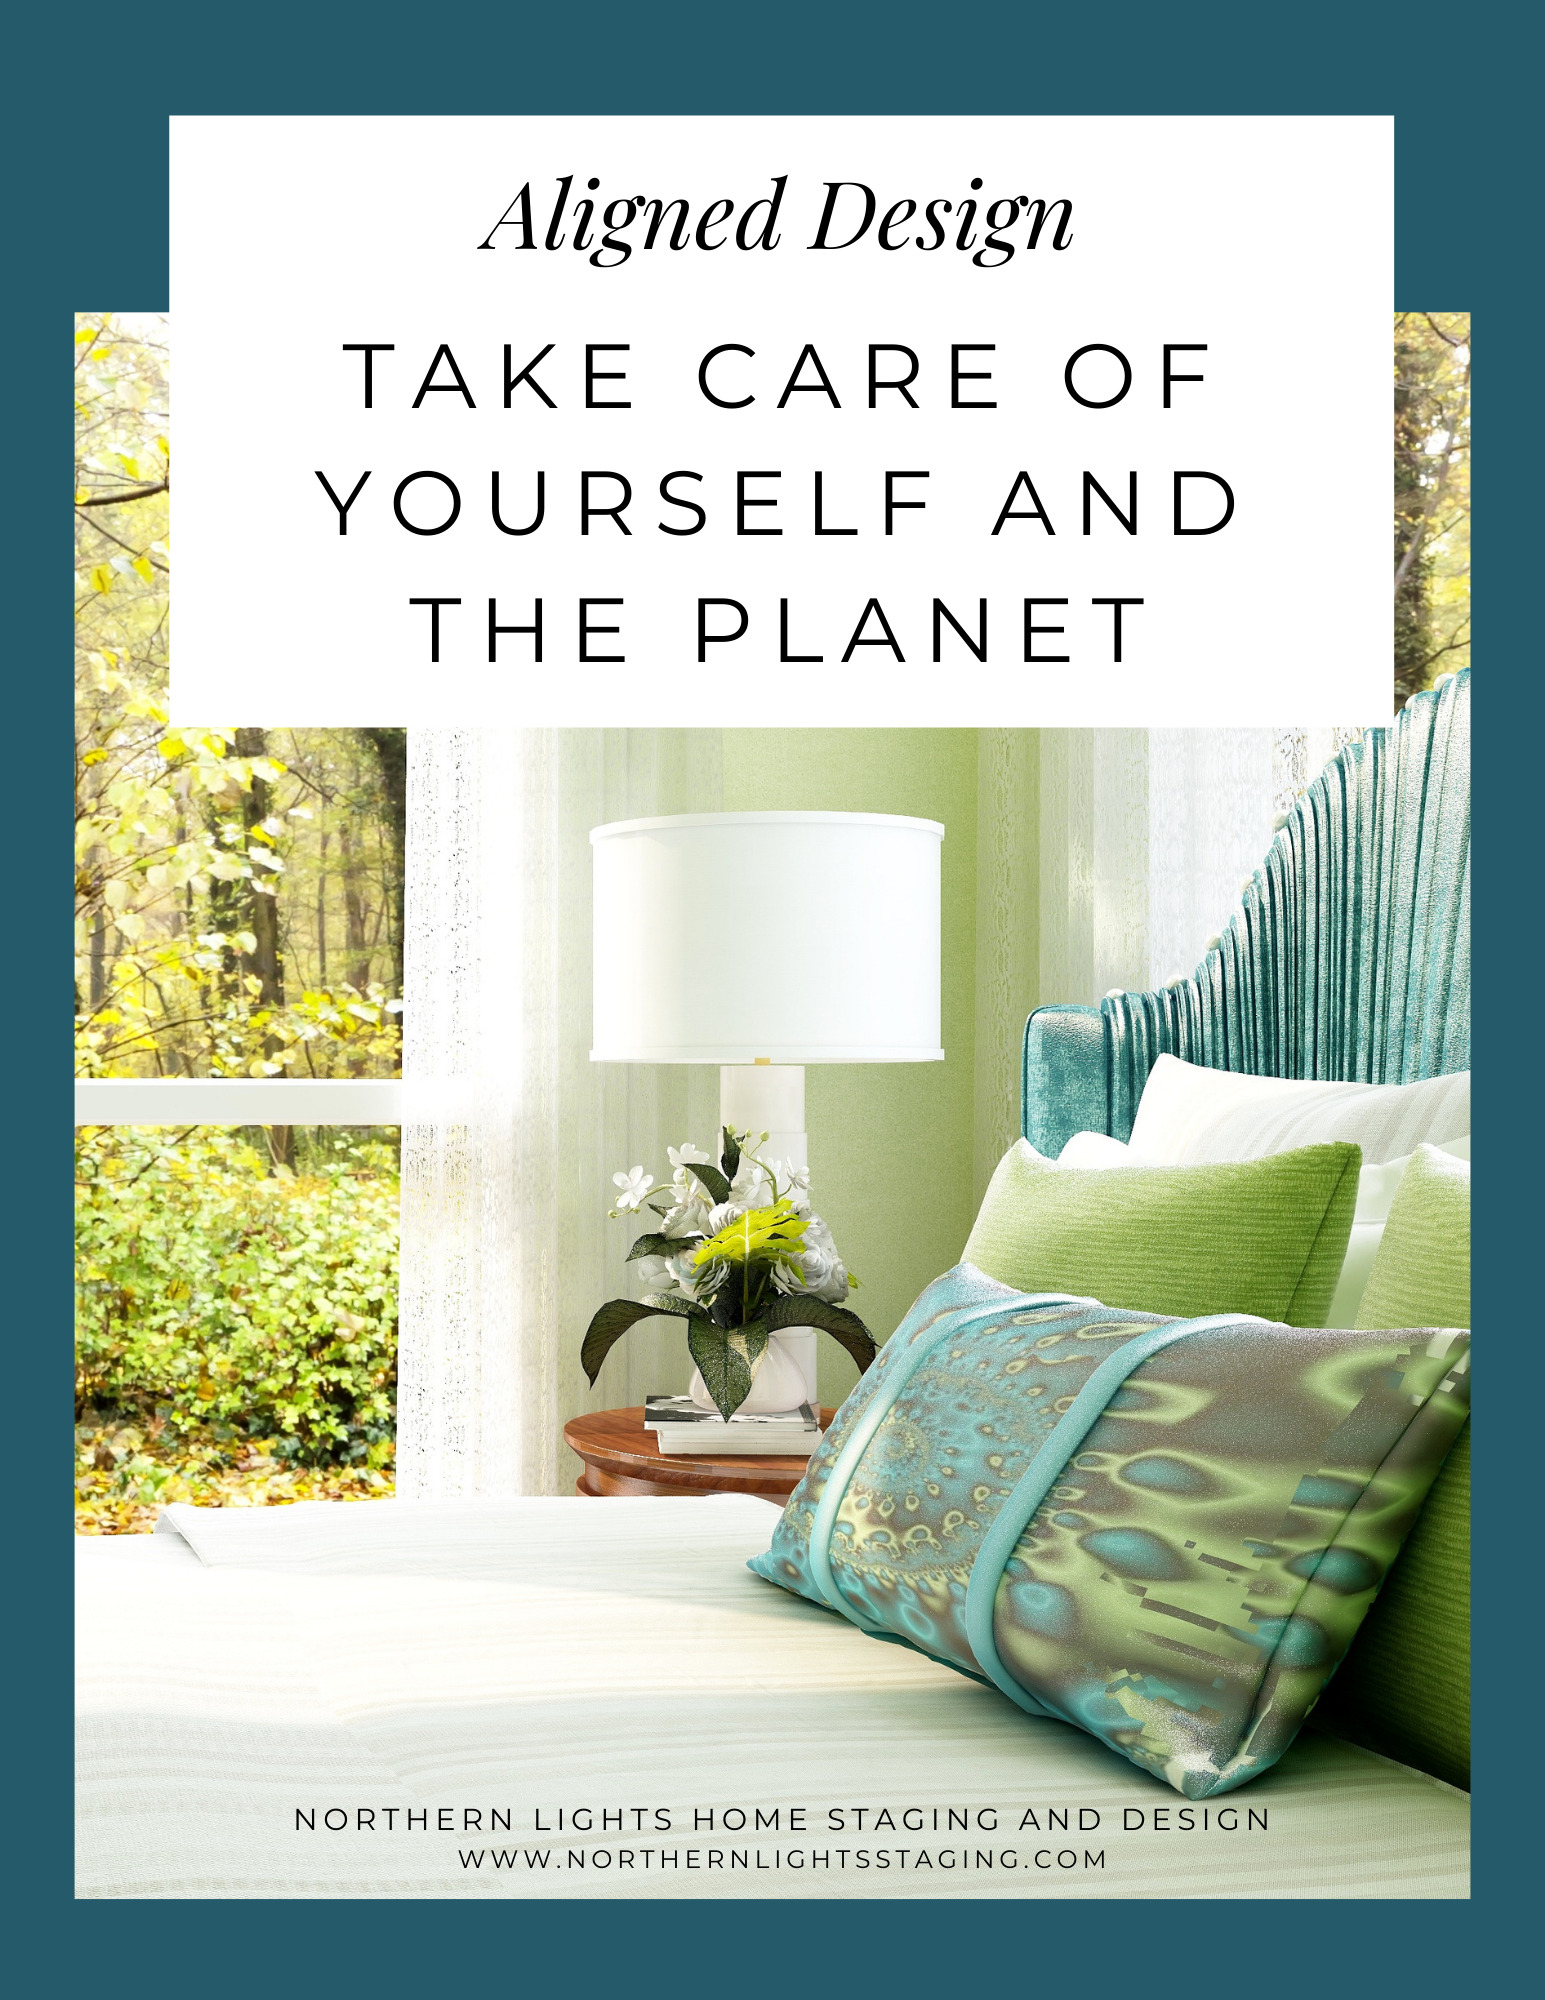 Aligned Design- Take Care of Yourself and the Planet